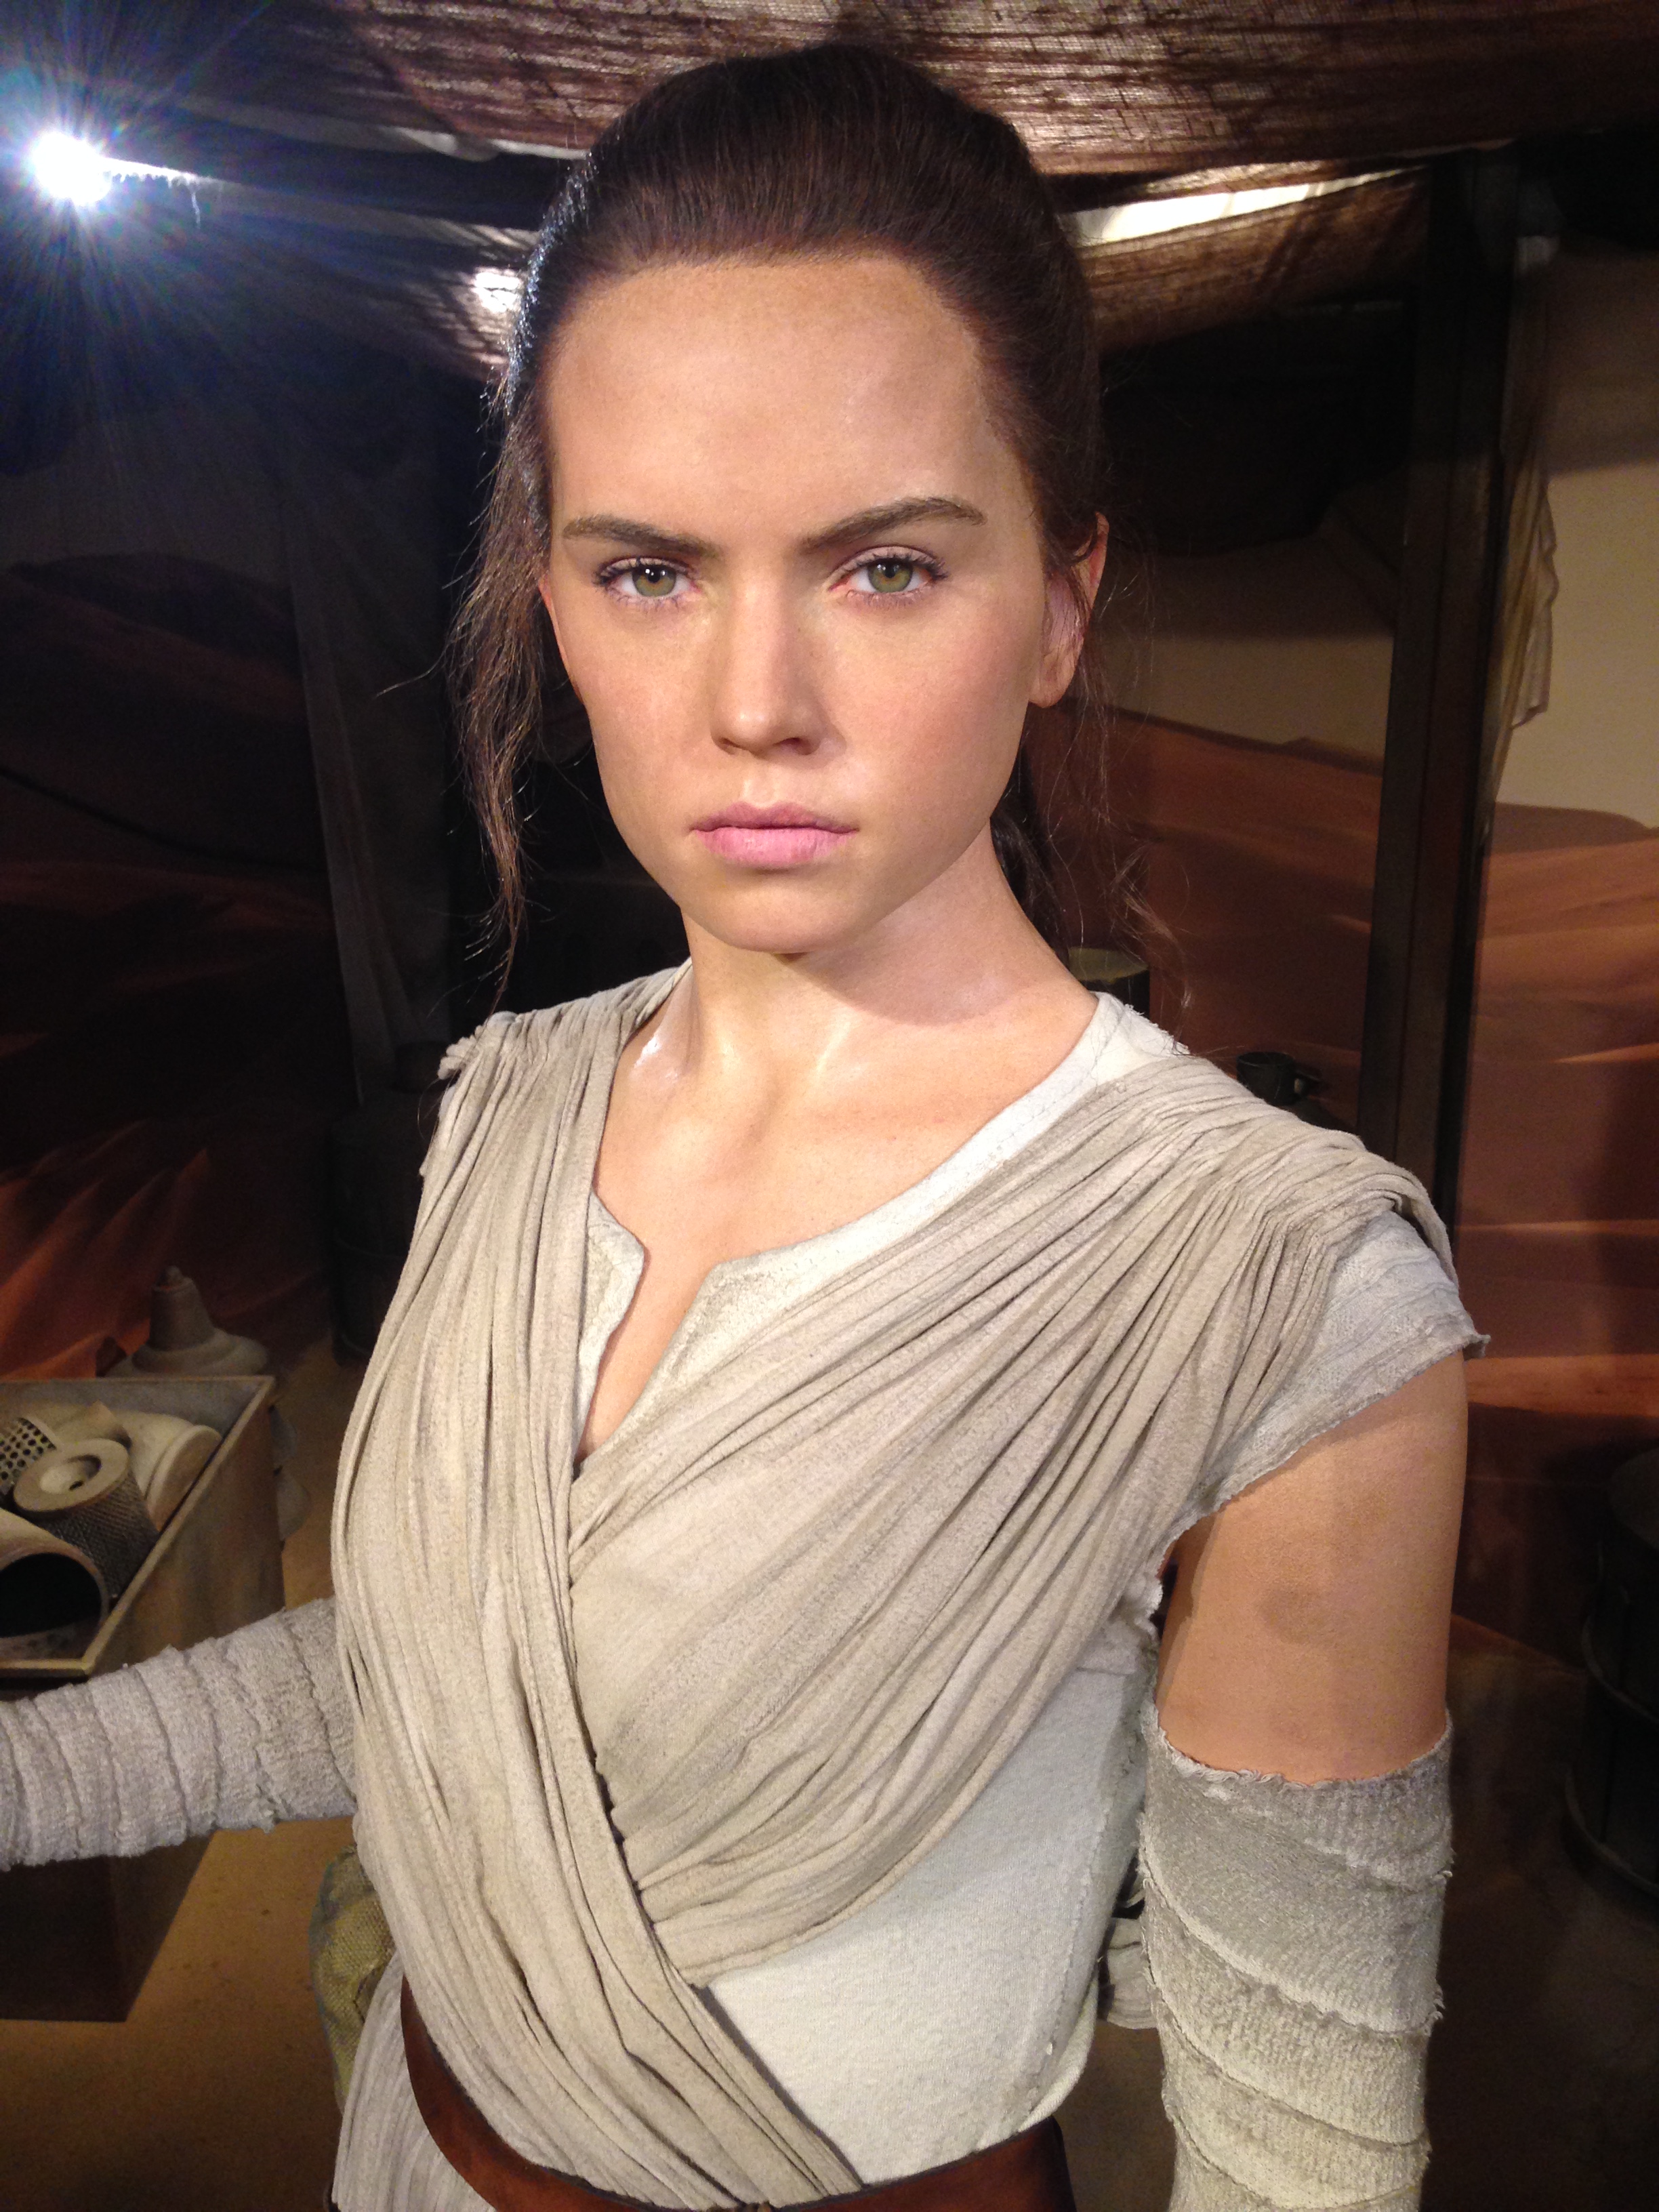 ariel caceres recommends picture of rey from star wars pic